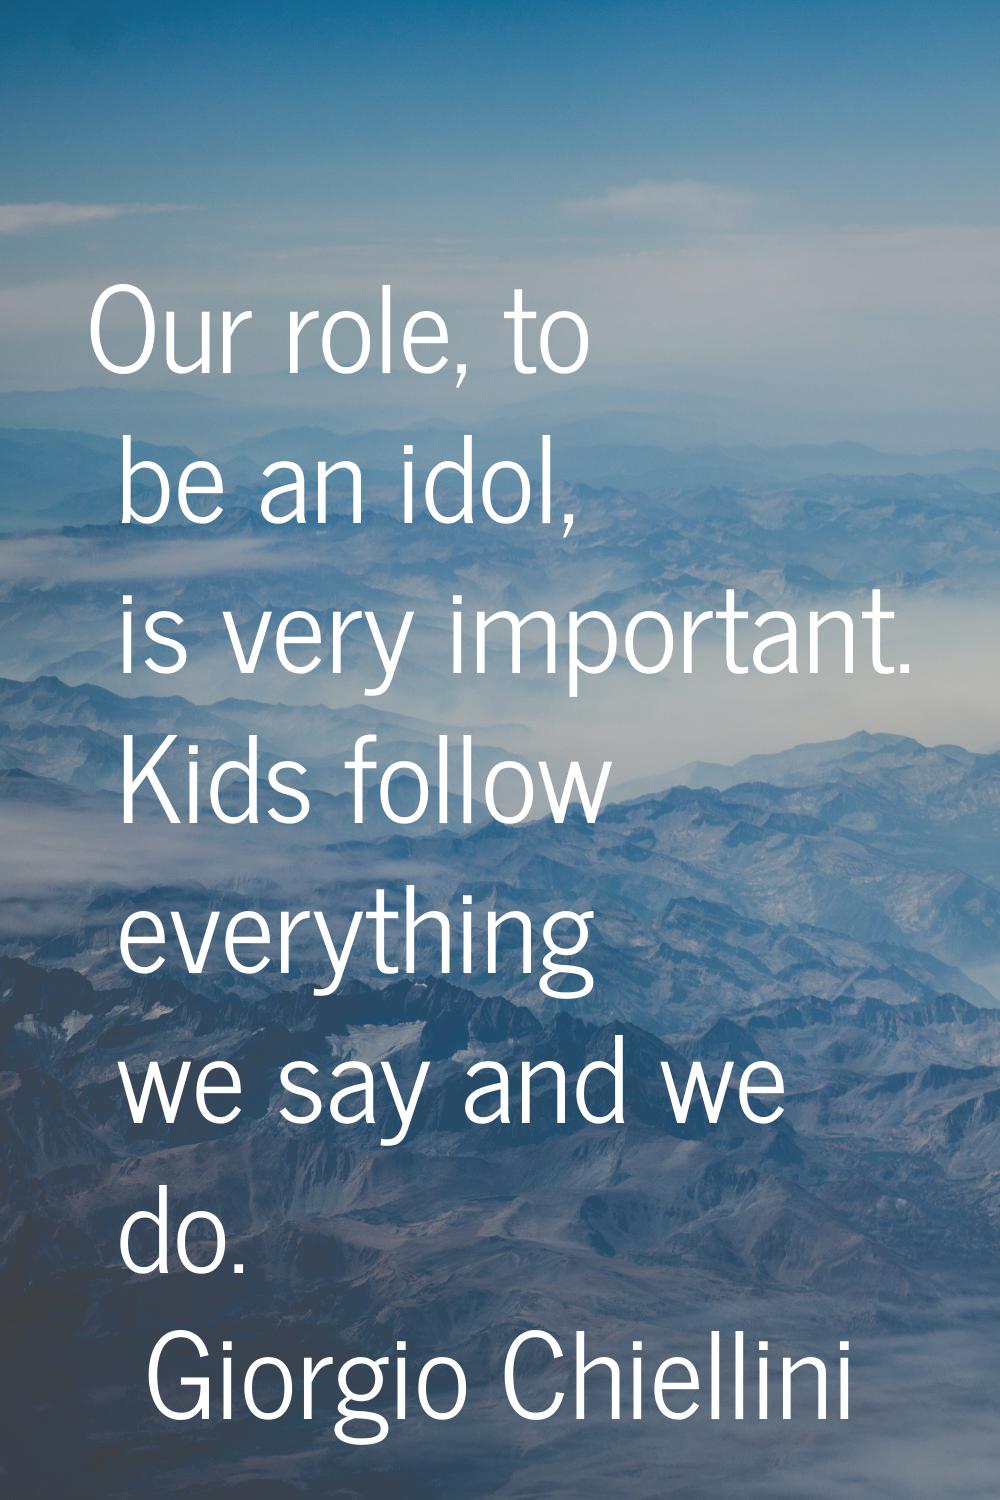 Our role, to be an idol, is very important. Kids follow everything we say and we do.